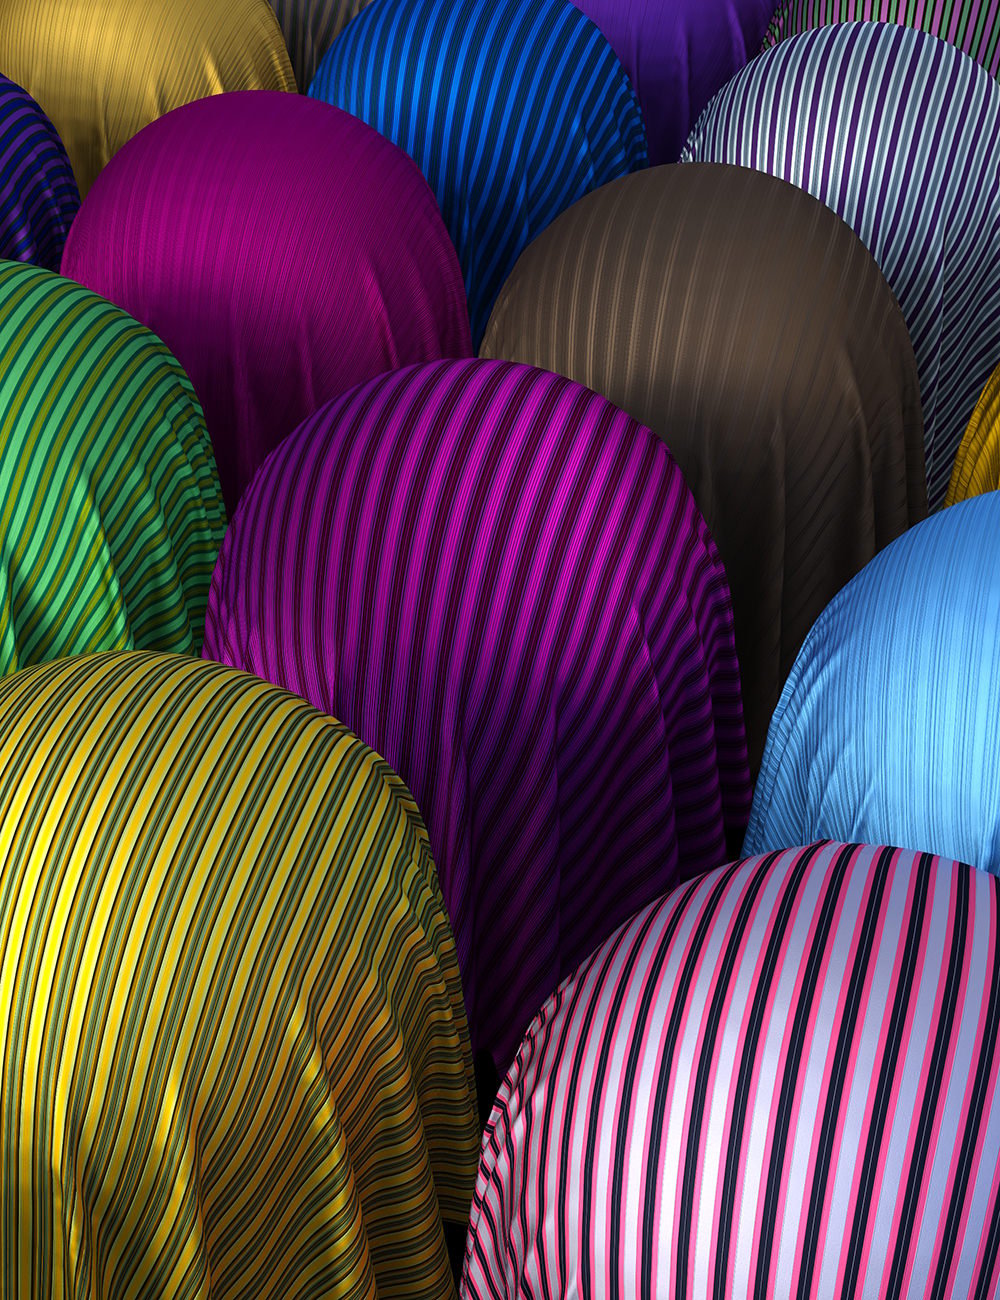 Stripes Galore Fabric Iray Shaders by: Nelmi, 3D Models by Daz 3D